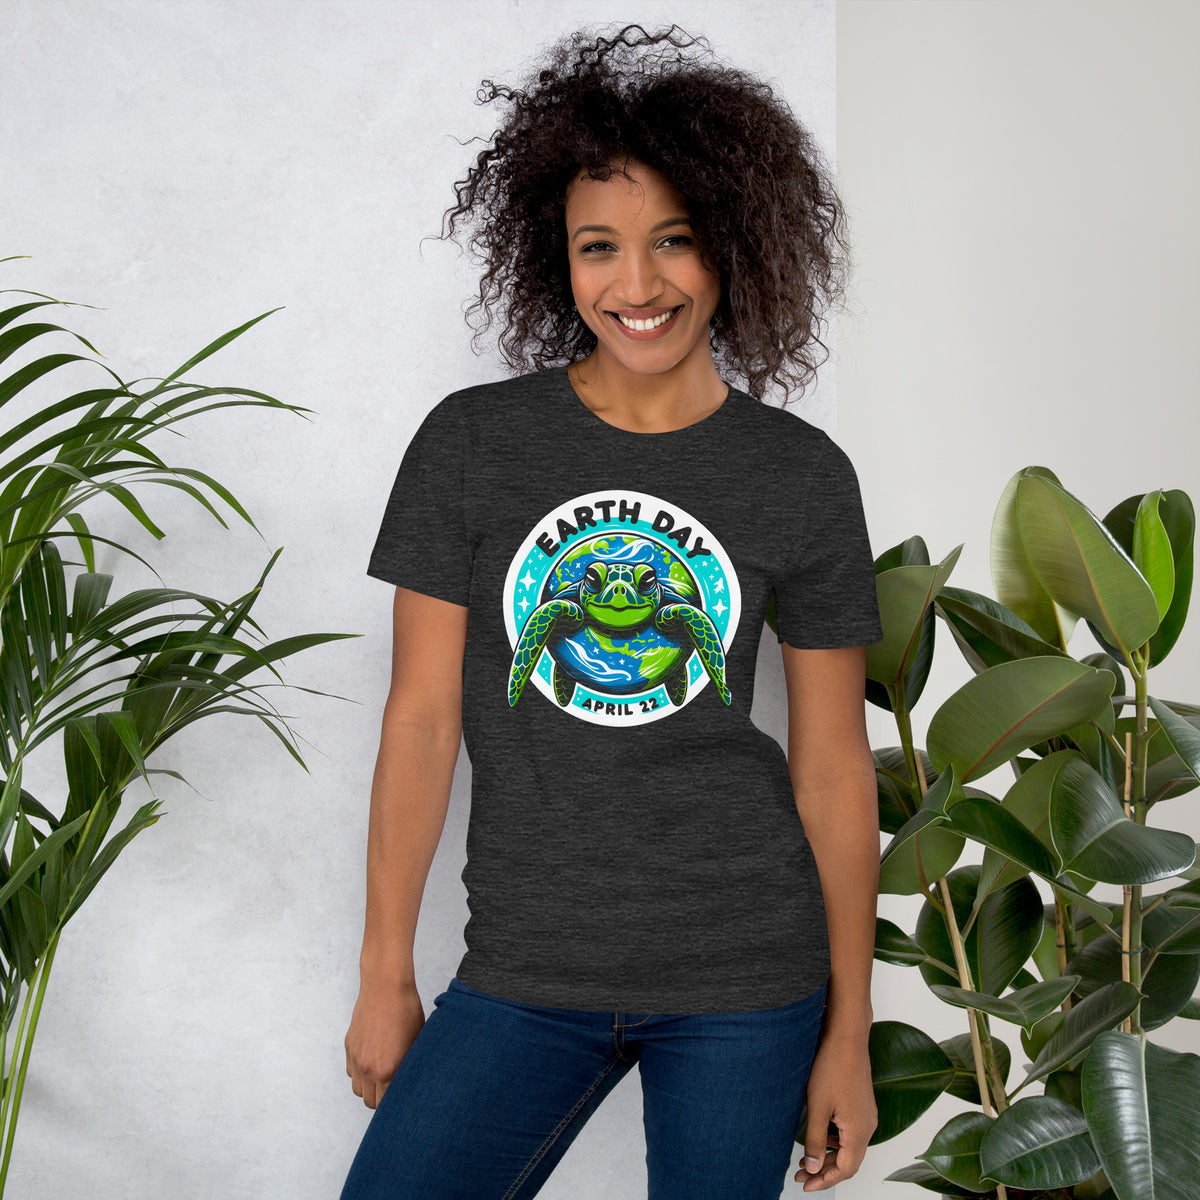 Earth Day Turtle Shirt, Galaxy Sea Turtle Tee for Animal Activists, Environment Conservation Gift, Celebrate April 22